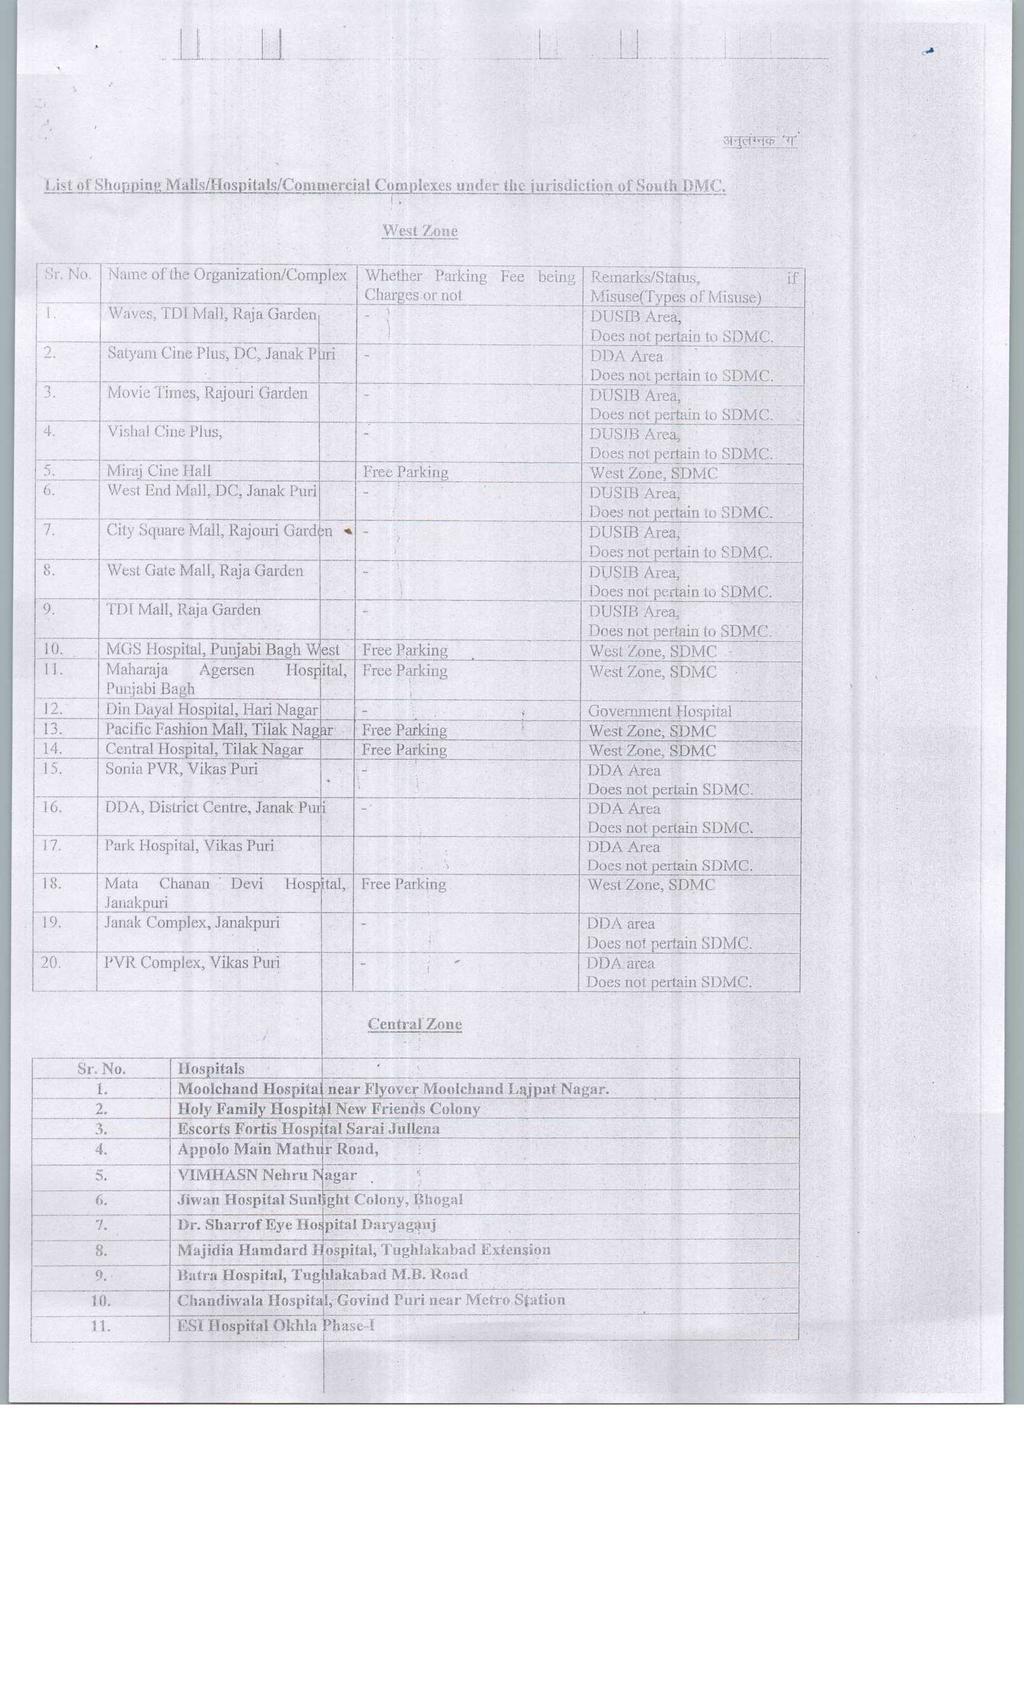 u. List of Shoppin^ MaH^/Hospitals/Comaiereial Complexes under the jurisdiction olsouth.^mc. West ^one Sr. No. 1 Name of the Organization/Complex 1. 2. 3-4. 5. 0. 7. 8. 9. 10. II. 12. 13. 14. 15. 16.